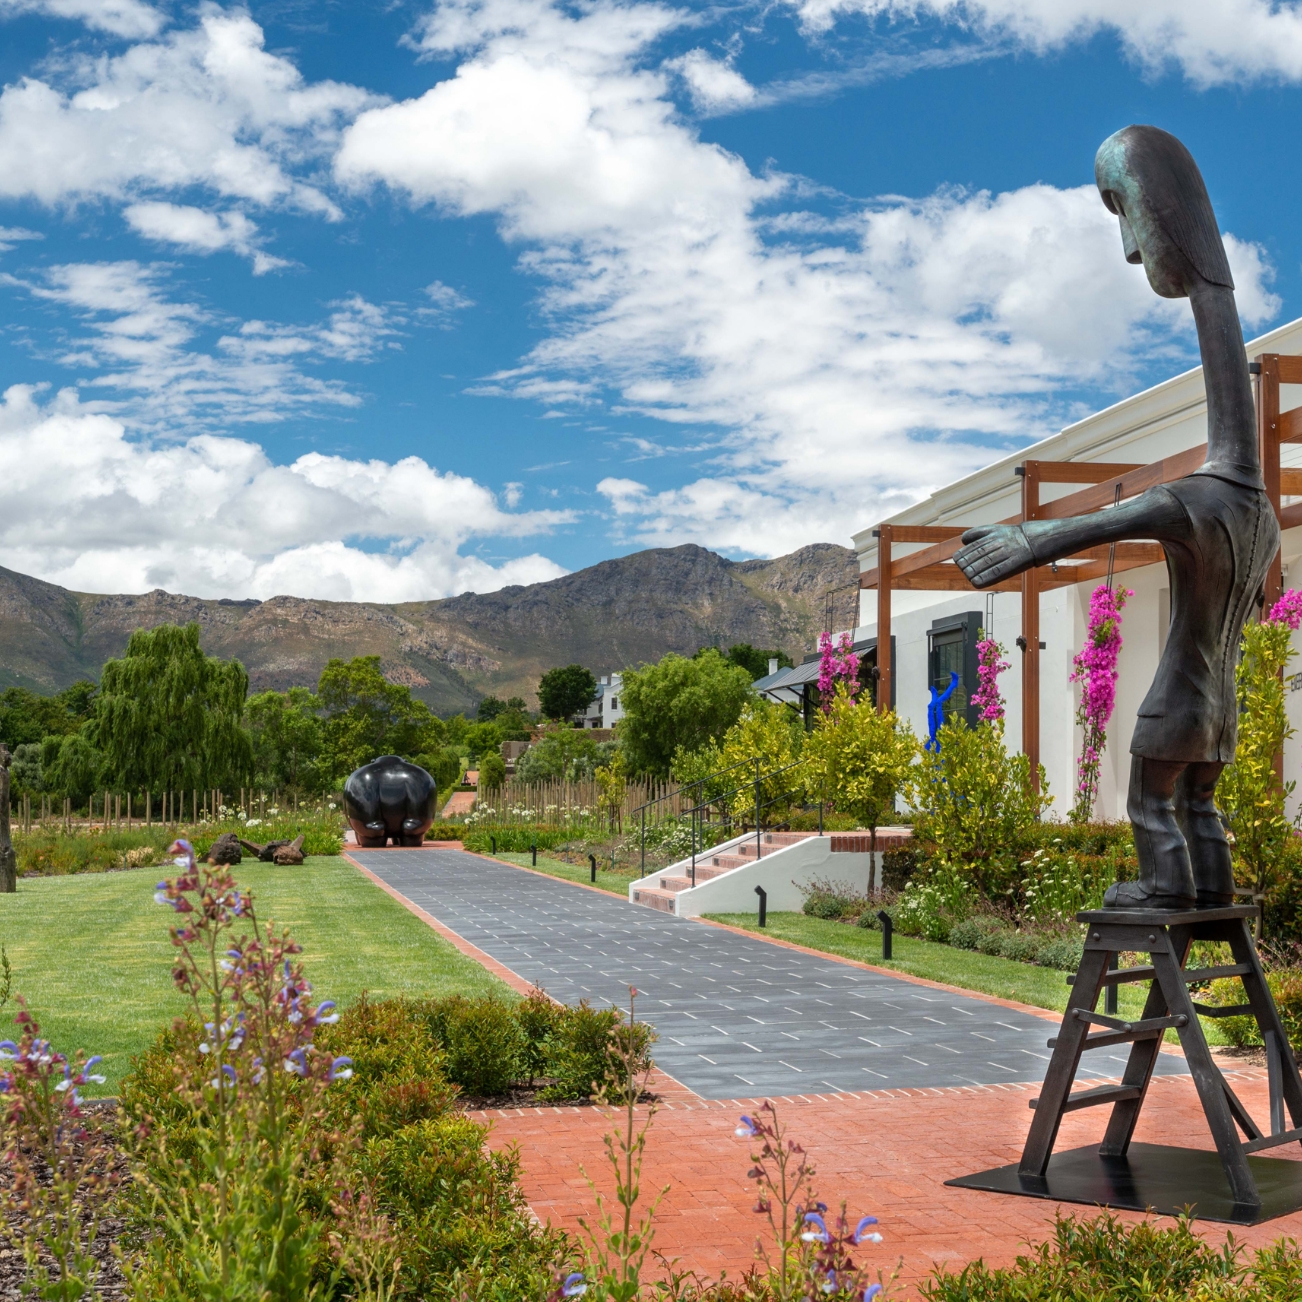 Leeucollection blog - 5 Things to Do at Leeu Estates in Franschhoek 1